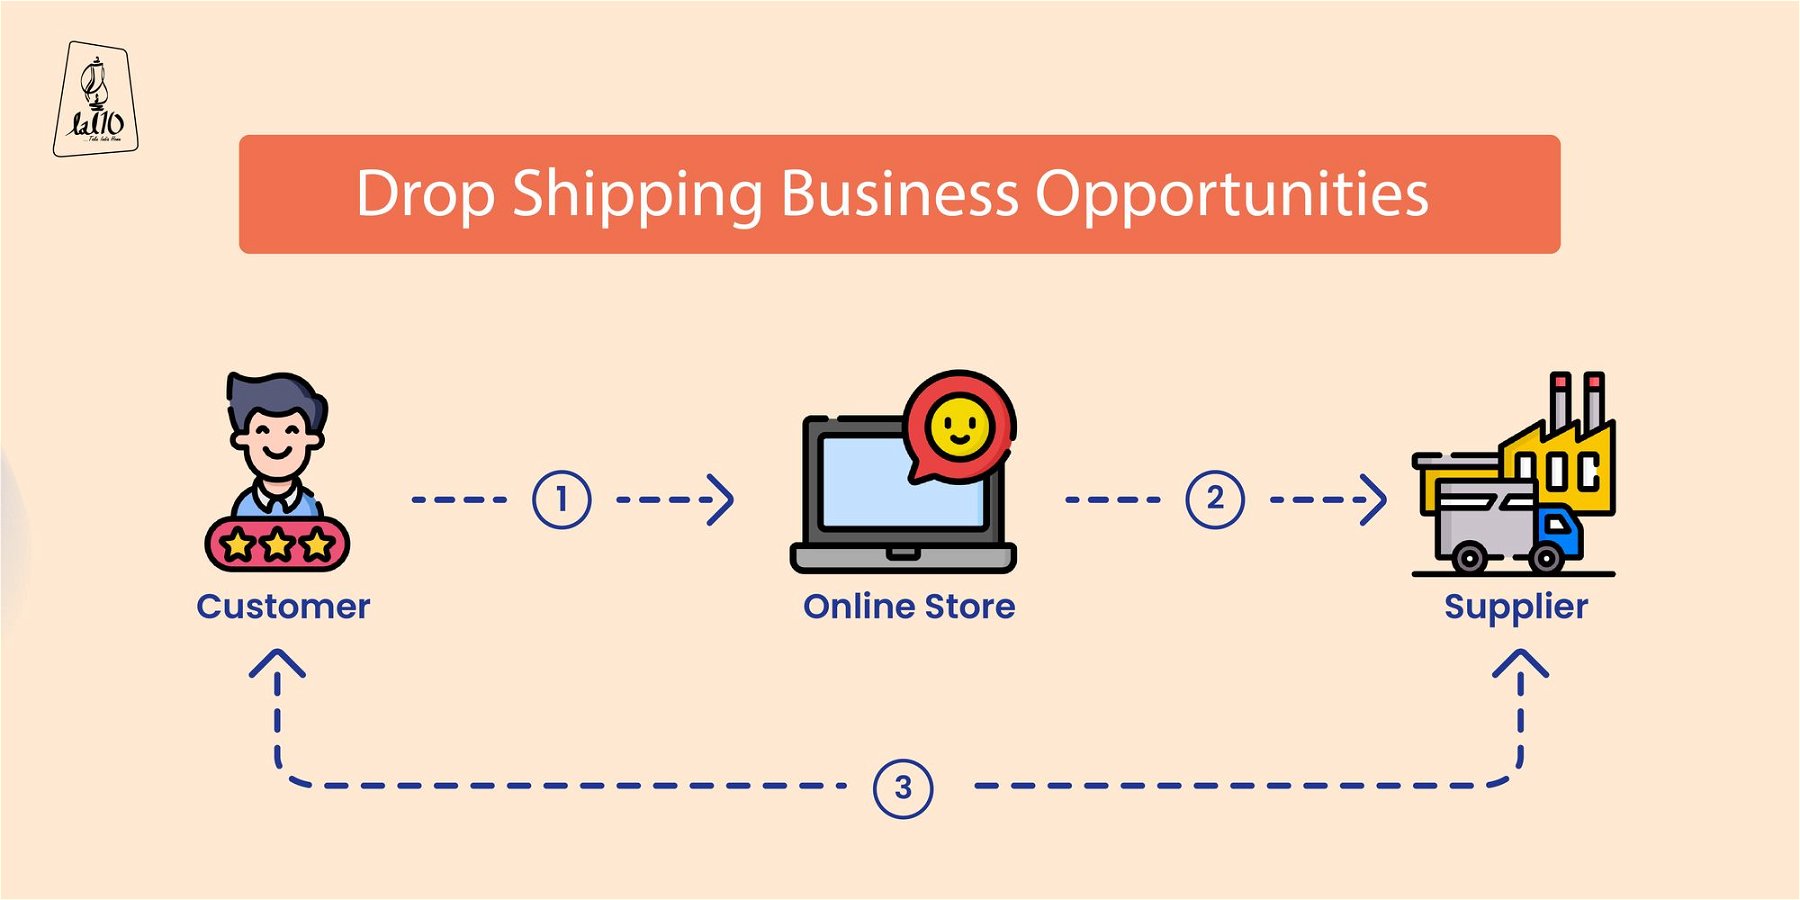 Drop Shipping Business Opportunities